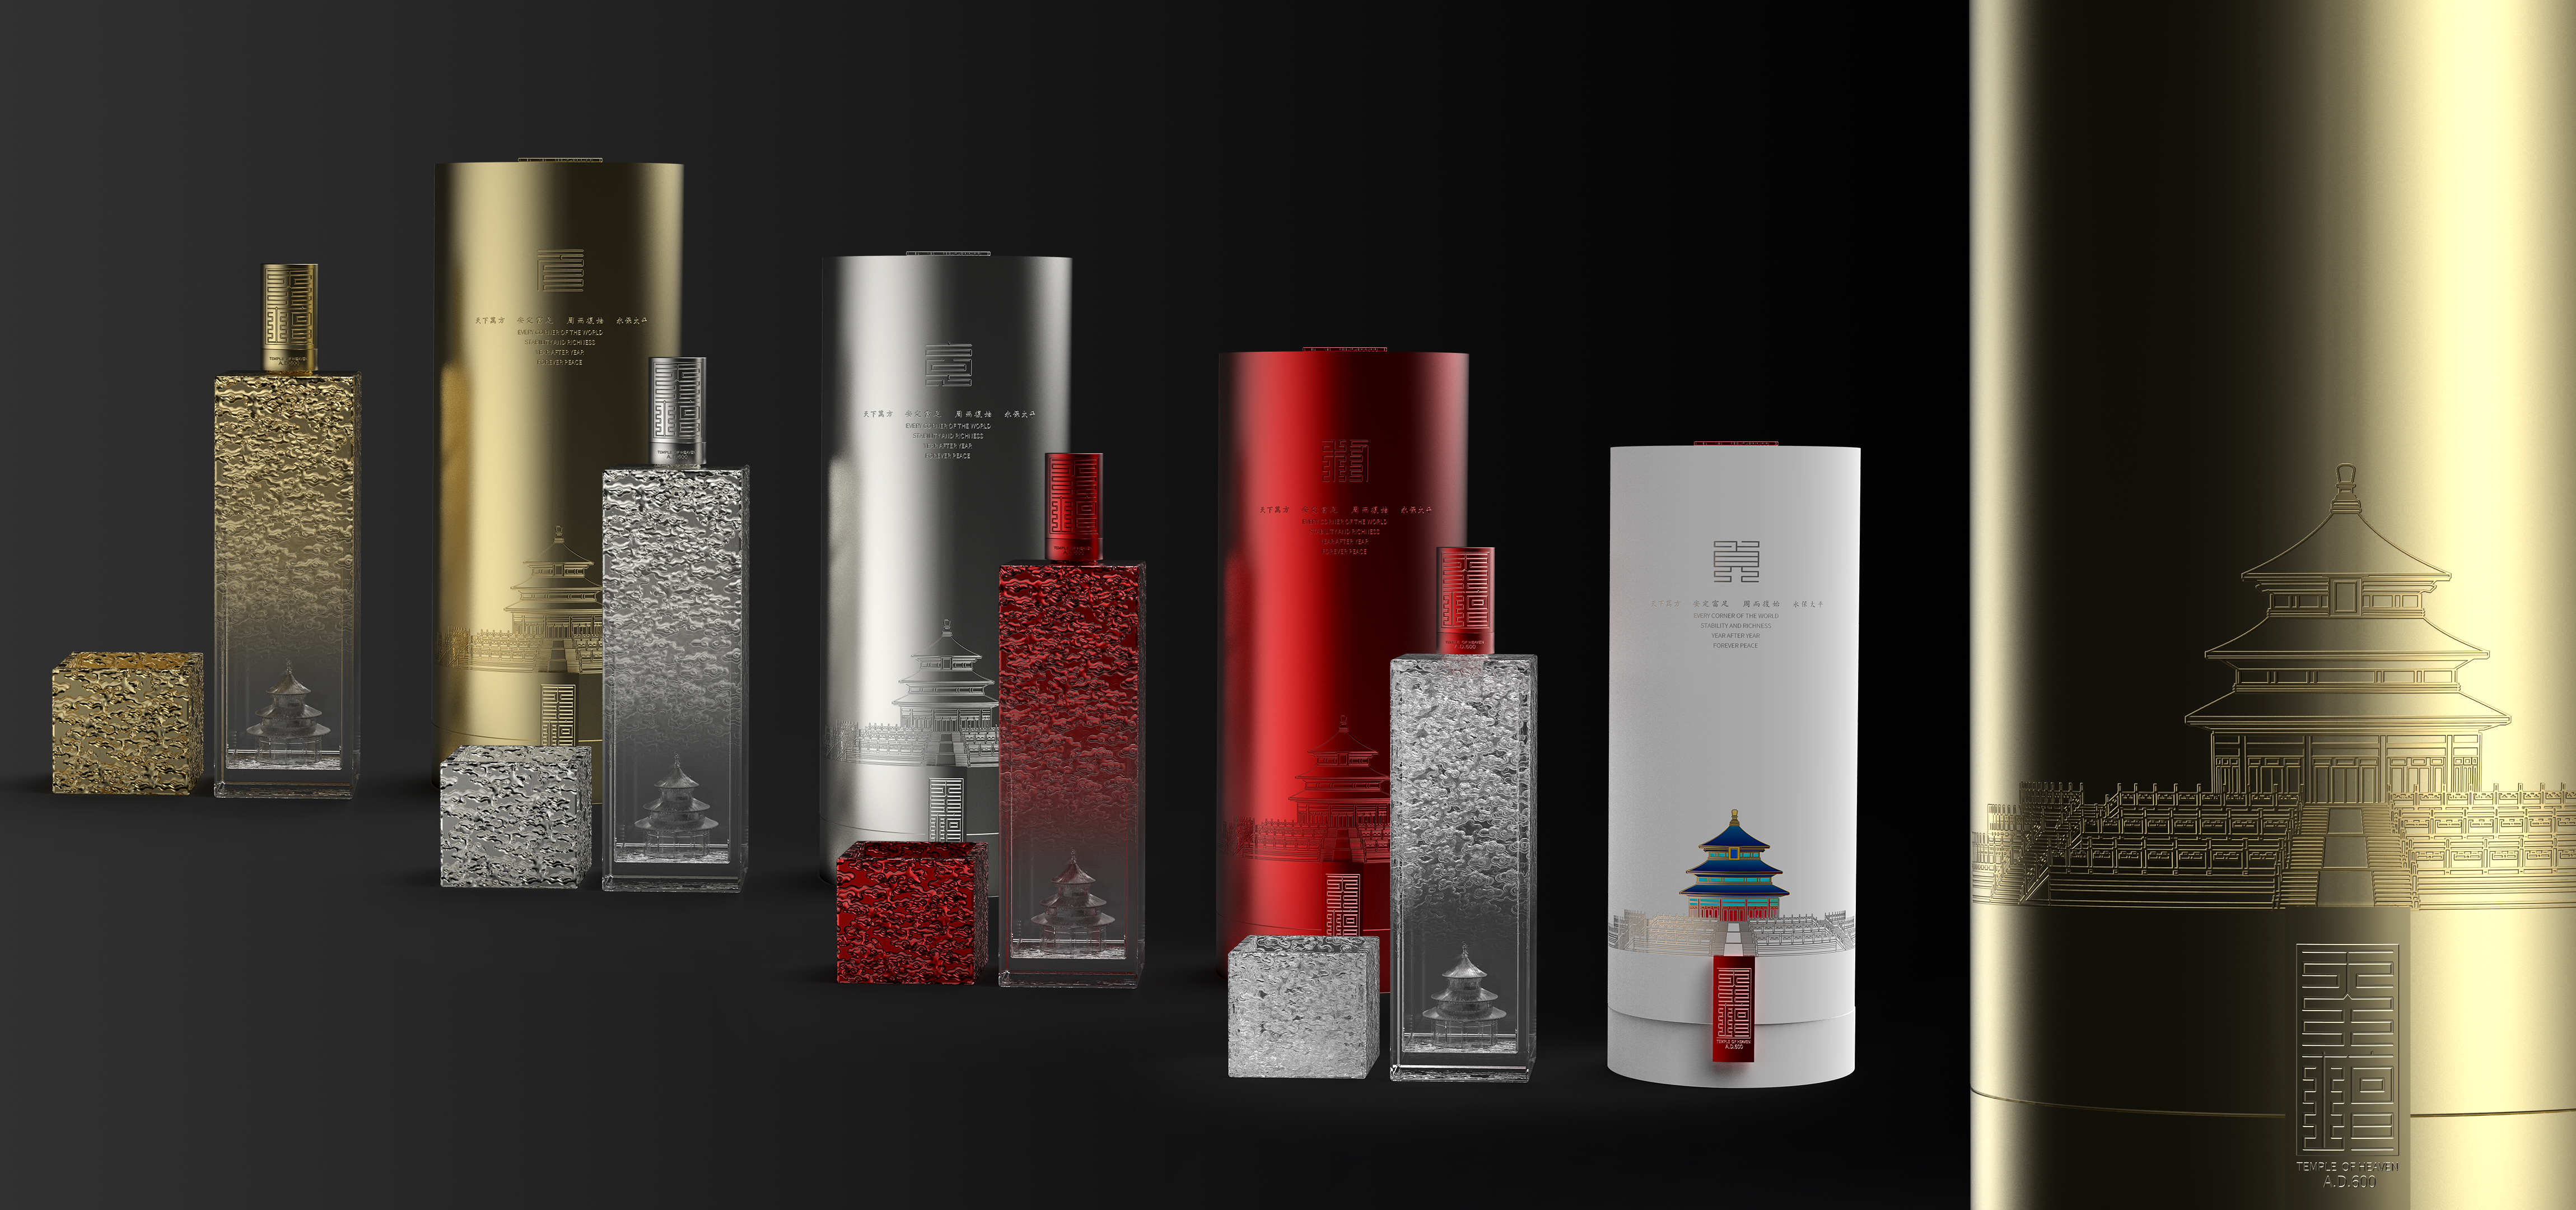 MUSE Design Winners - Liquor for 600th Anniversary of Temple of Heaven